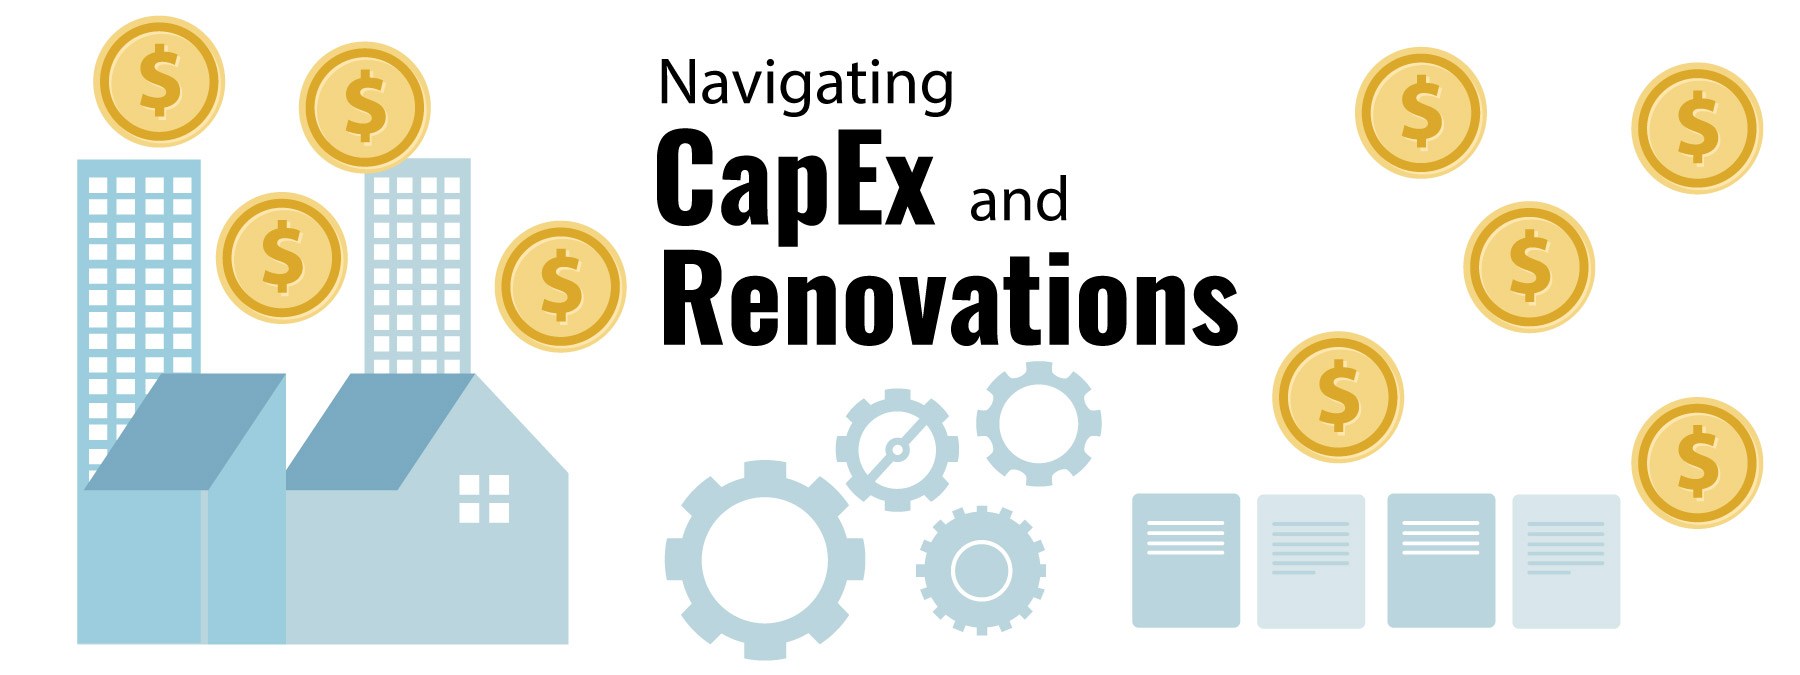 Featured image for “Navigating the Complex World of Capex and Renovations”